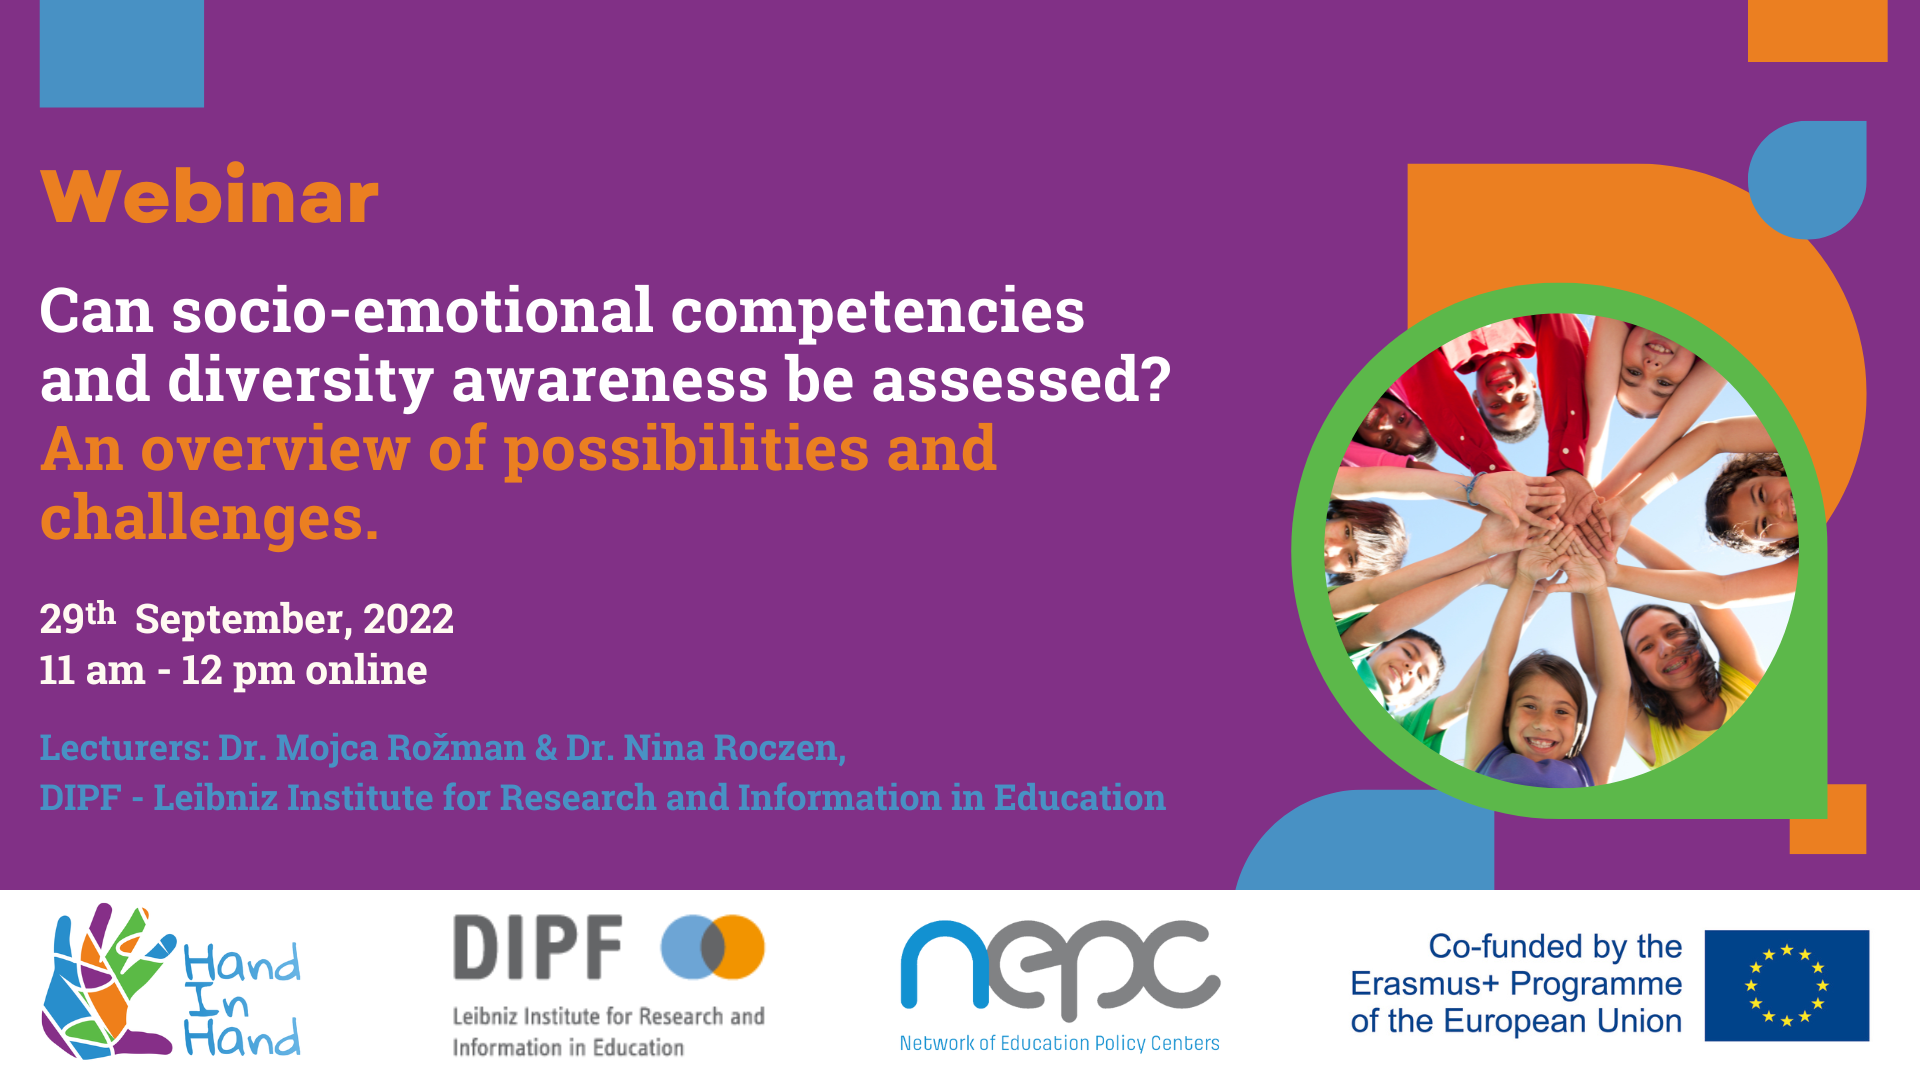 Webinar HAND ET Can socio-emotional competencies and diversity awareness be assessed An overview of possibilities and challenges